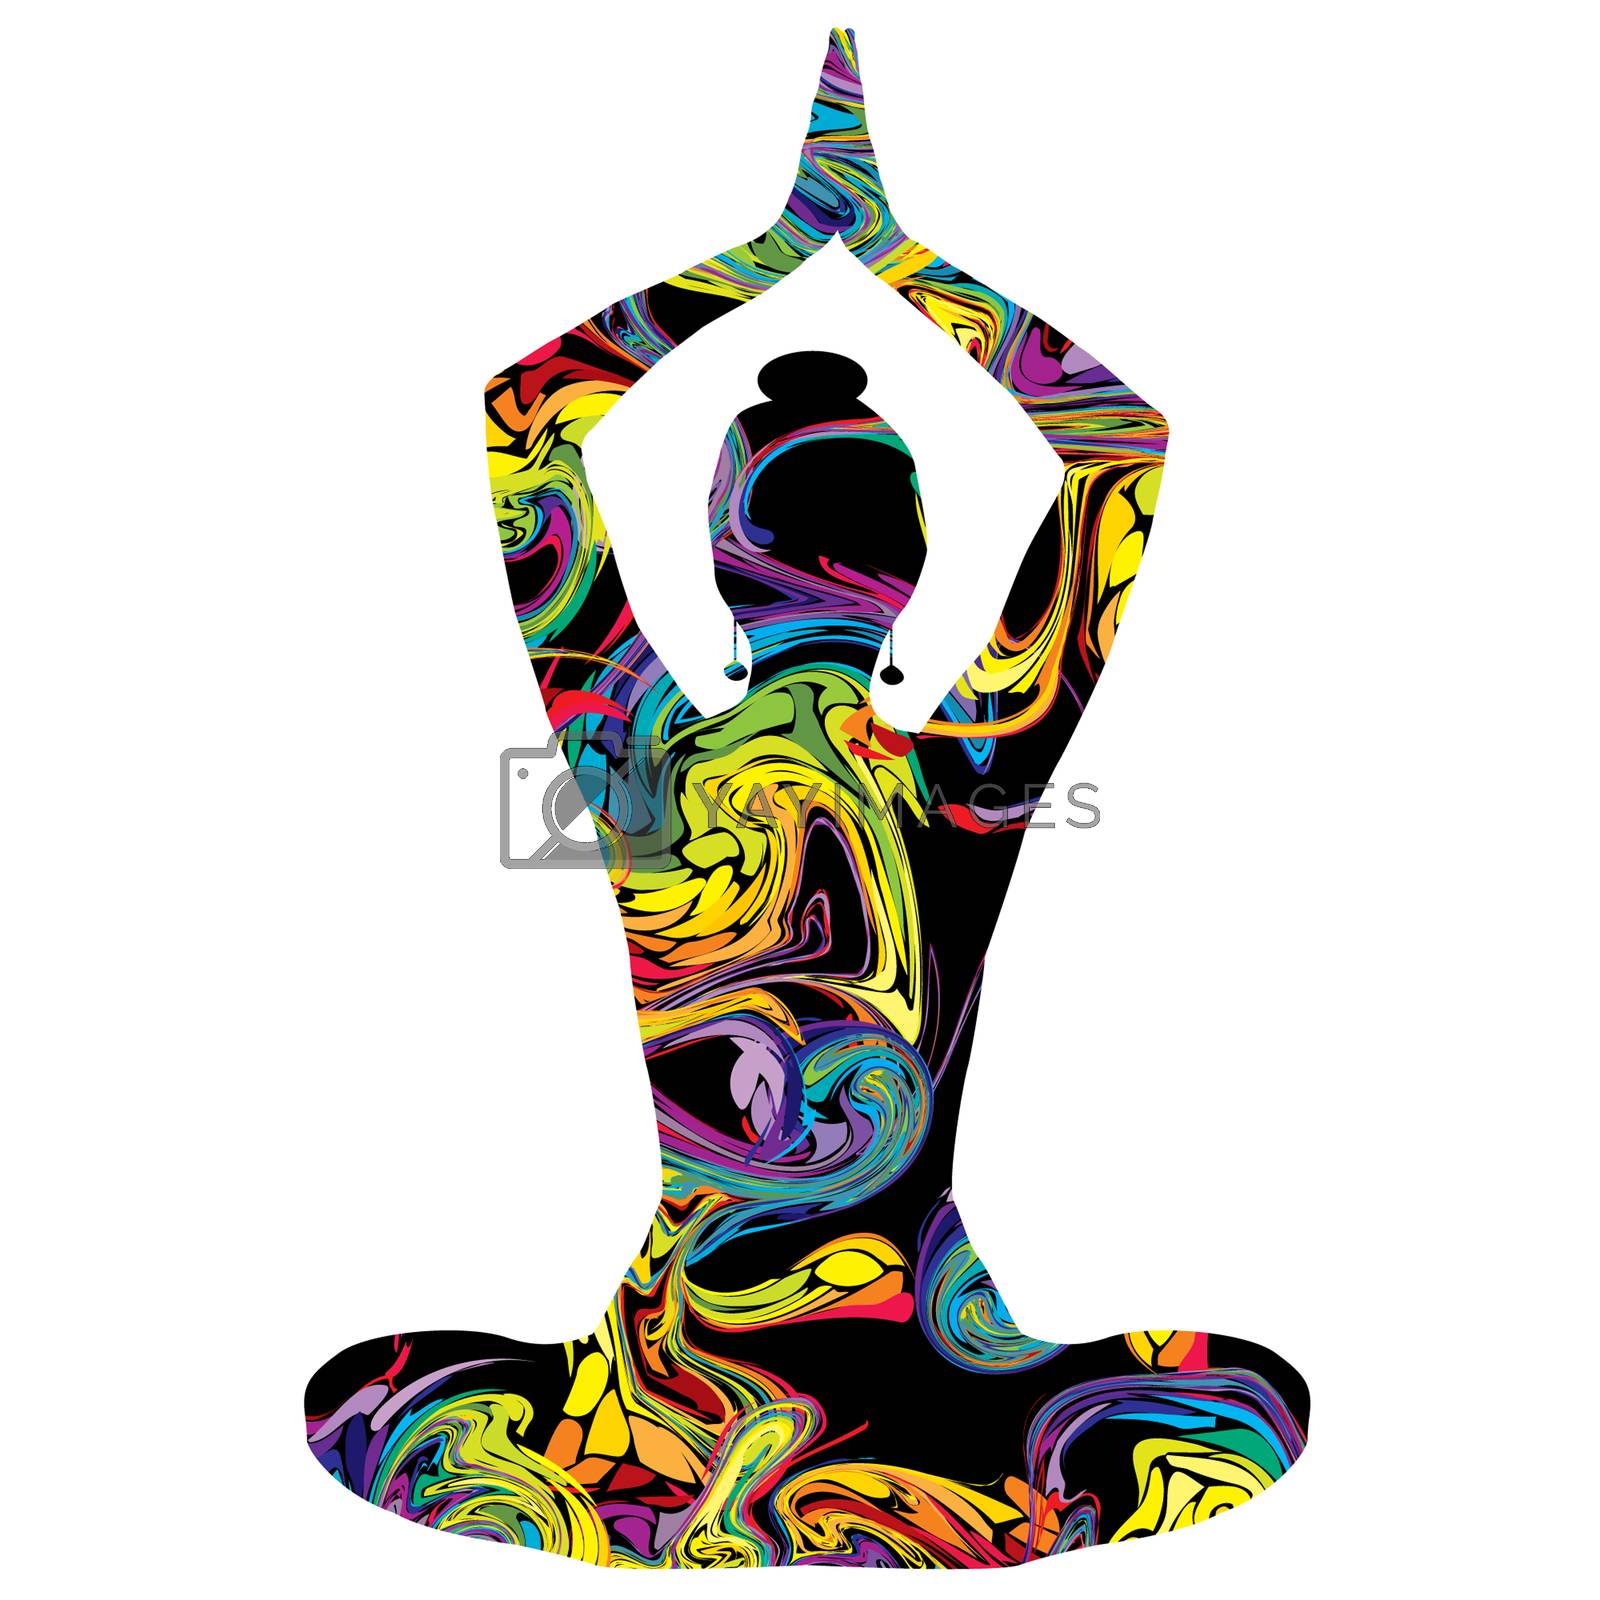 Royalty free image of Colorful woman silhouette in yoga pose by hibrida13